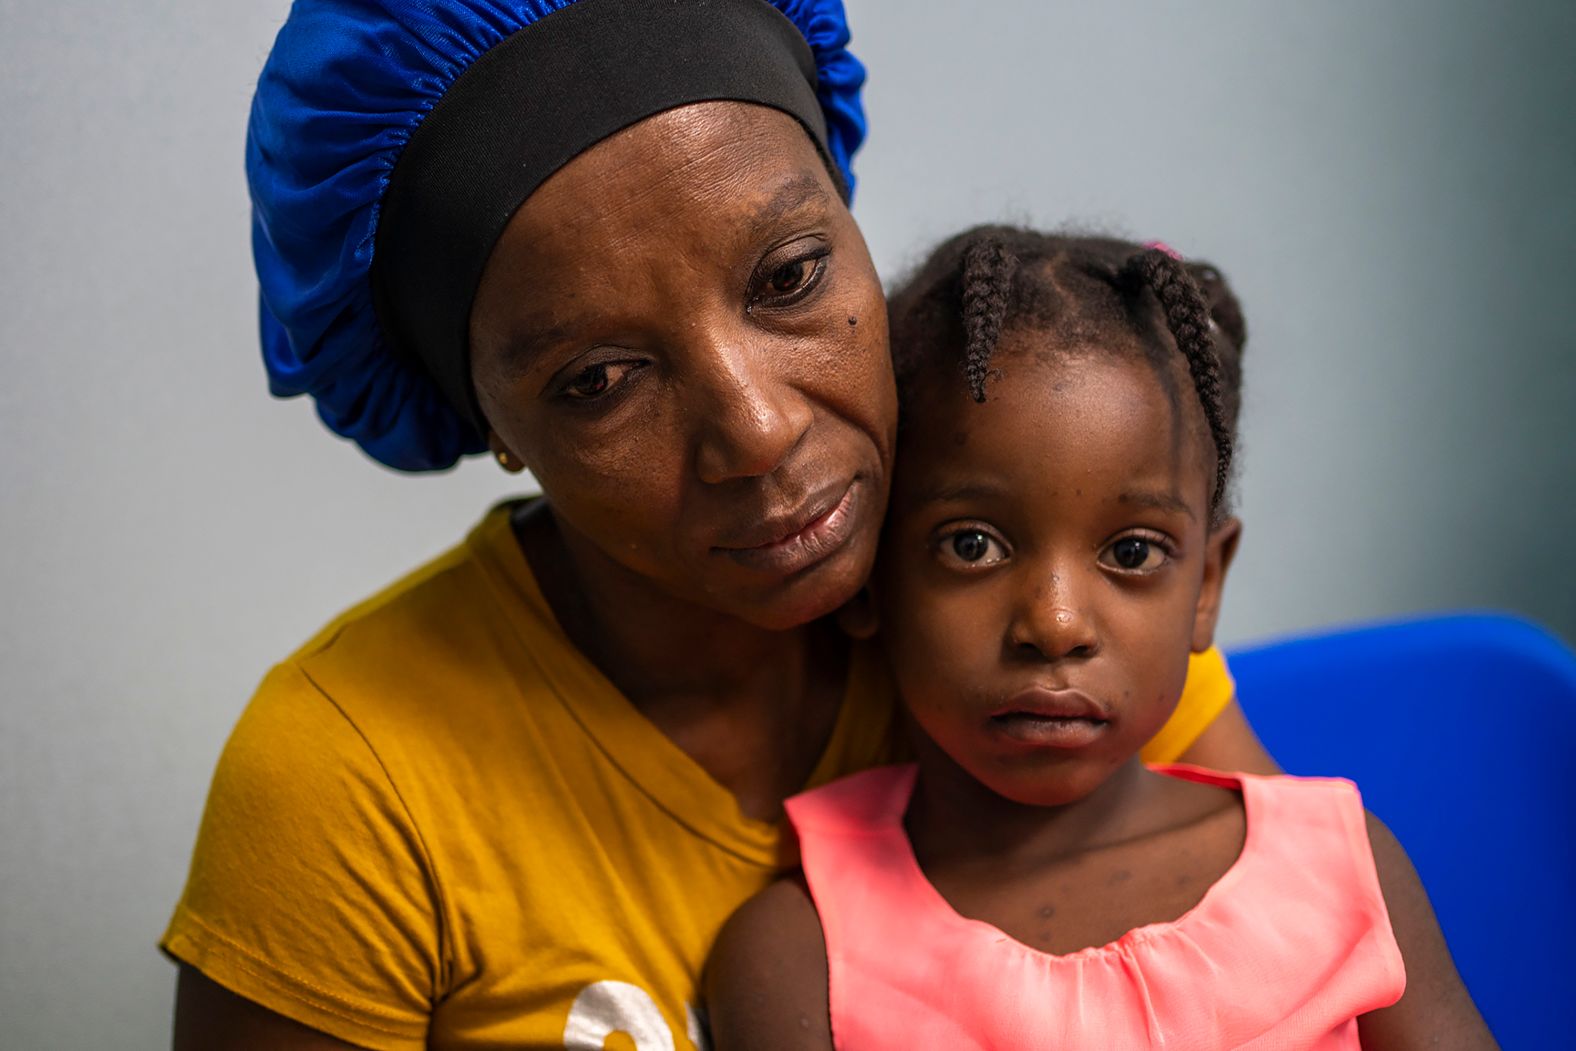 Louicamene Chery and her daughter Marie-Christine Marcelin, 4, wait at Médecins Sans Frontières emergency clinic in Port-au-Prince, Haiti, on Sunday, March 17. Since the start of the month, <a href="index.php?page=&url=https%3A%2F%2Fwww.cnn.com%2F2024%2F03%2F18%2Fworld%2Fhaiti-crisis-militias-battle-intl-latam%2Findex.html" target="_blank">criminal groups have been attacking</a> the last remnants of the Haitian state in the capital city. Typically packed <a href="index.php?page=&url=https%3A%2F%2Fwww.cnn.com%2F2024%2F03%2F20%2Fus%2Fhaiti-us-citizen-evacuation-flight%2Findex.html" target="_blank">streets of the capital have become ghostlands</a> as residents rarely leave their homes under the threat of violence, CNN crews have reported.